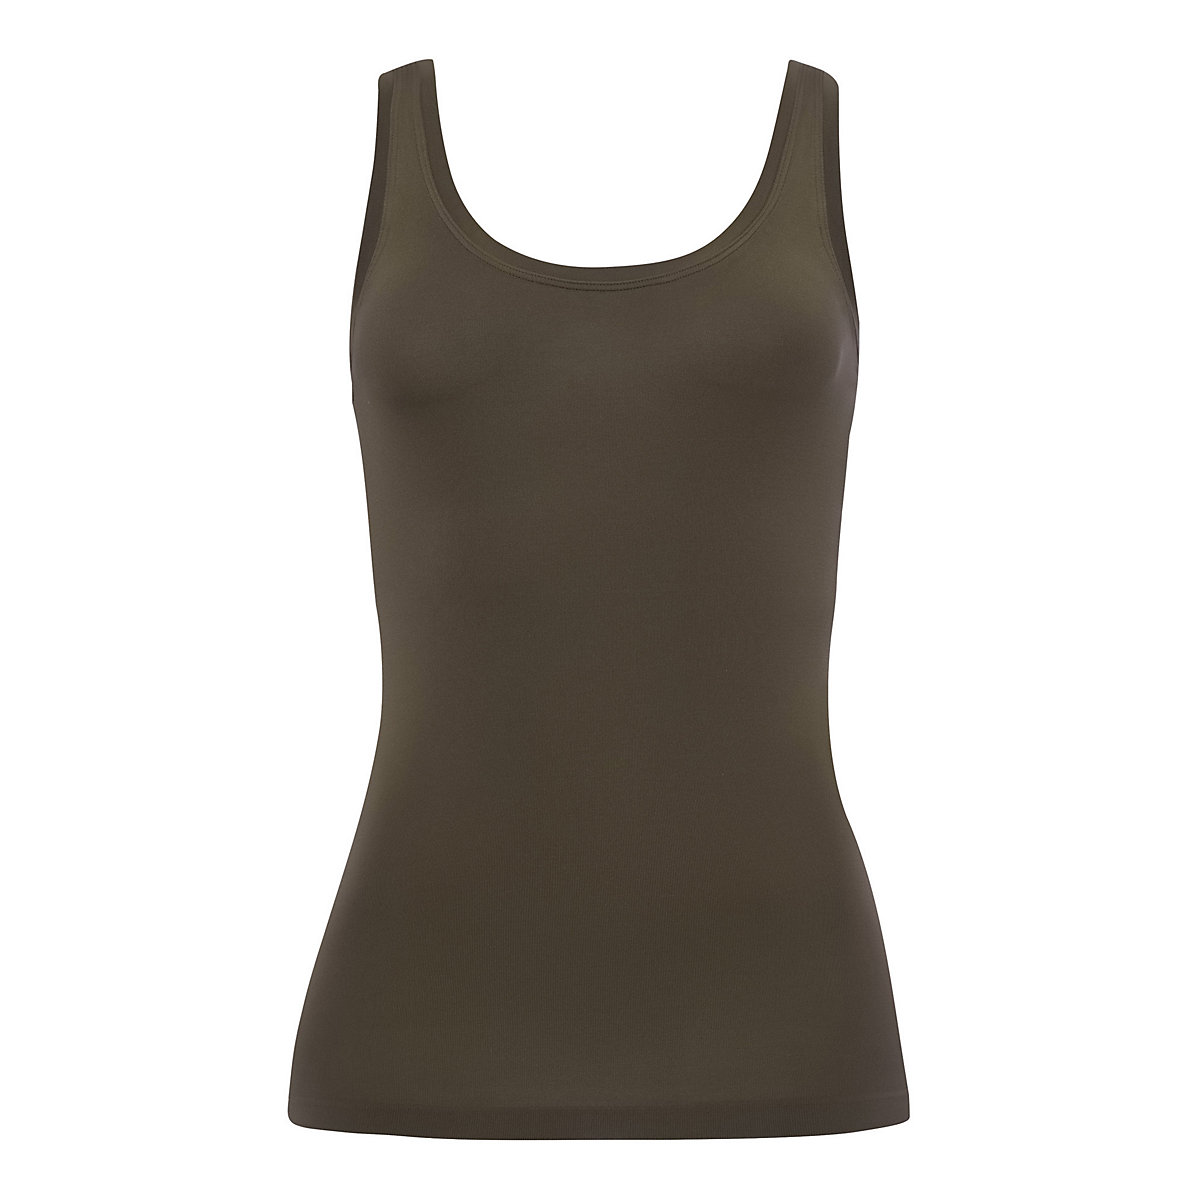 HANRO Top Touch Feeling Tops olive